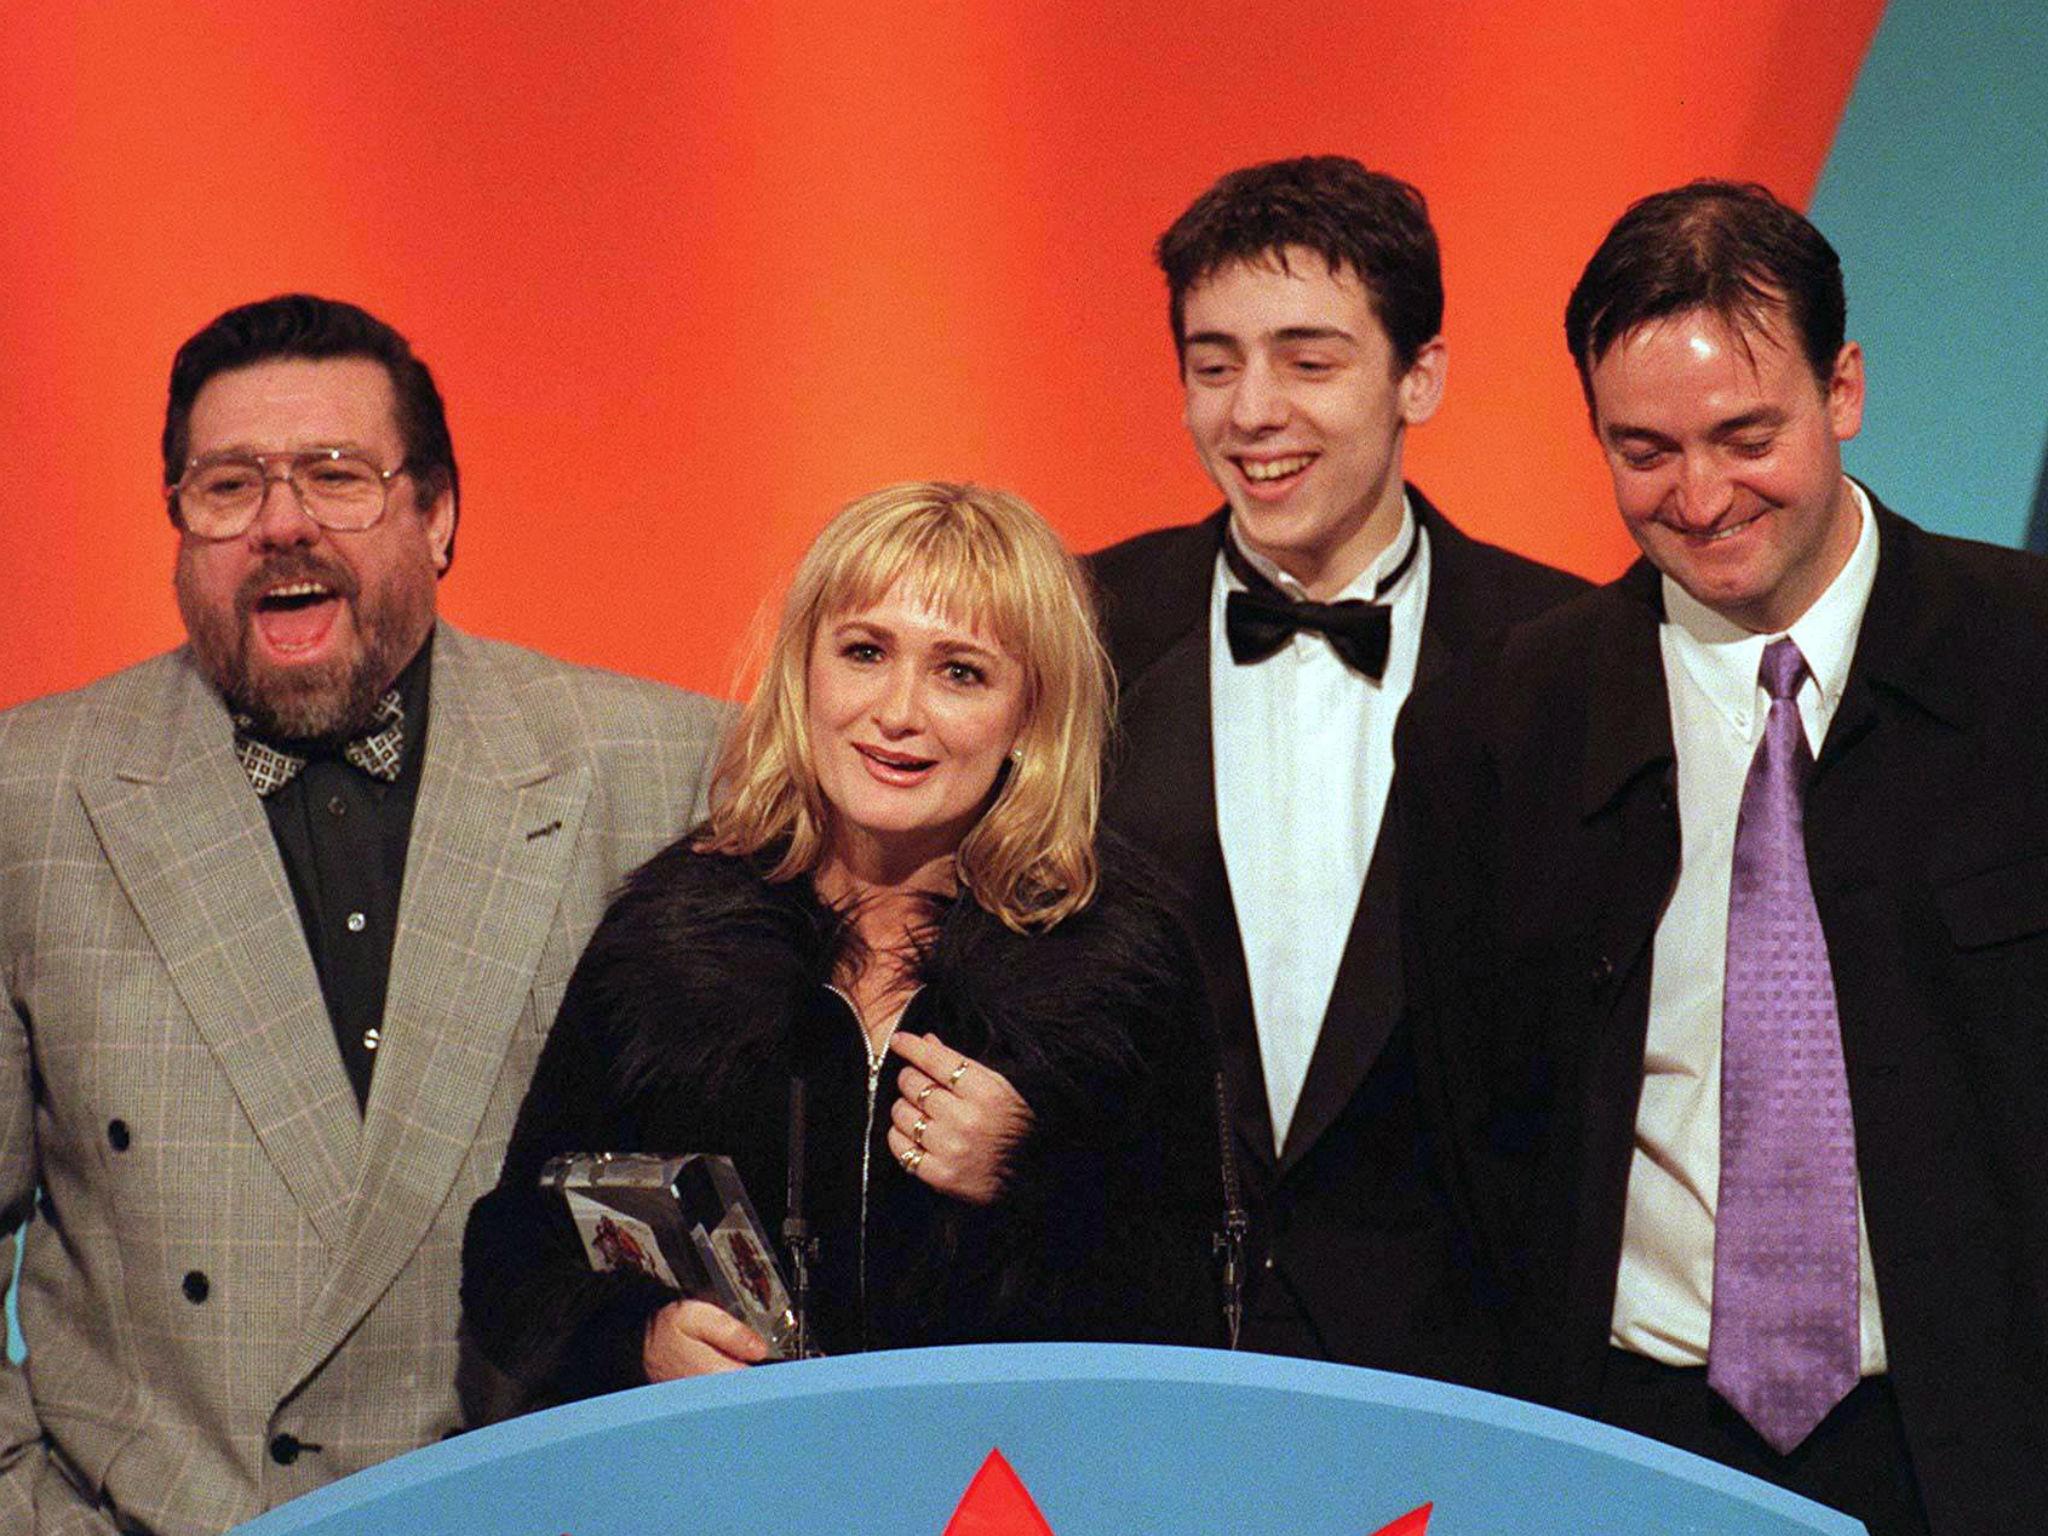 Ricky Tomlinson, Caroline Aherne, Ralf Little and Craig Cash at the British Comedy Awards in 1998